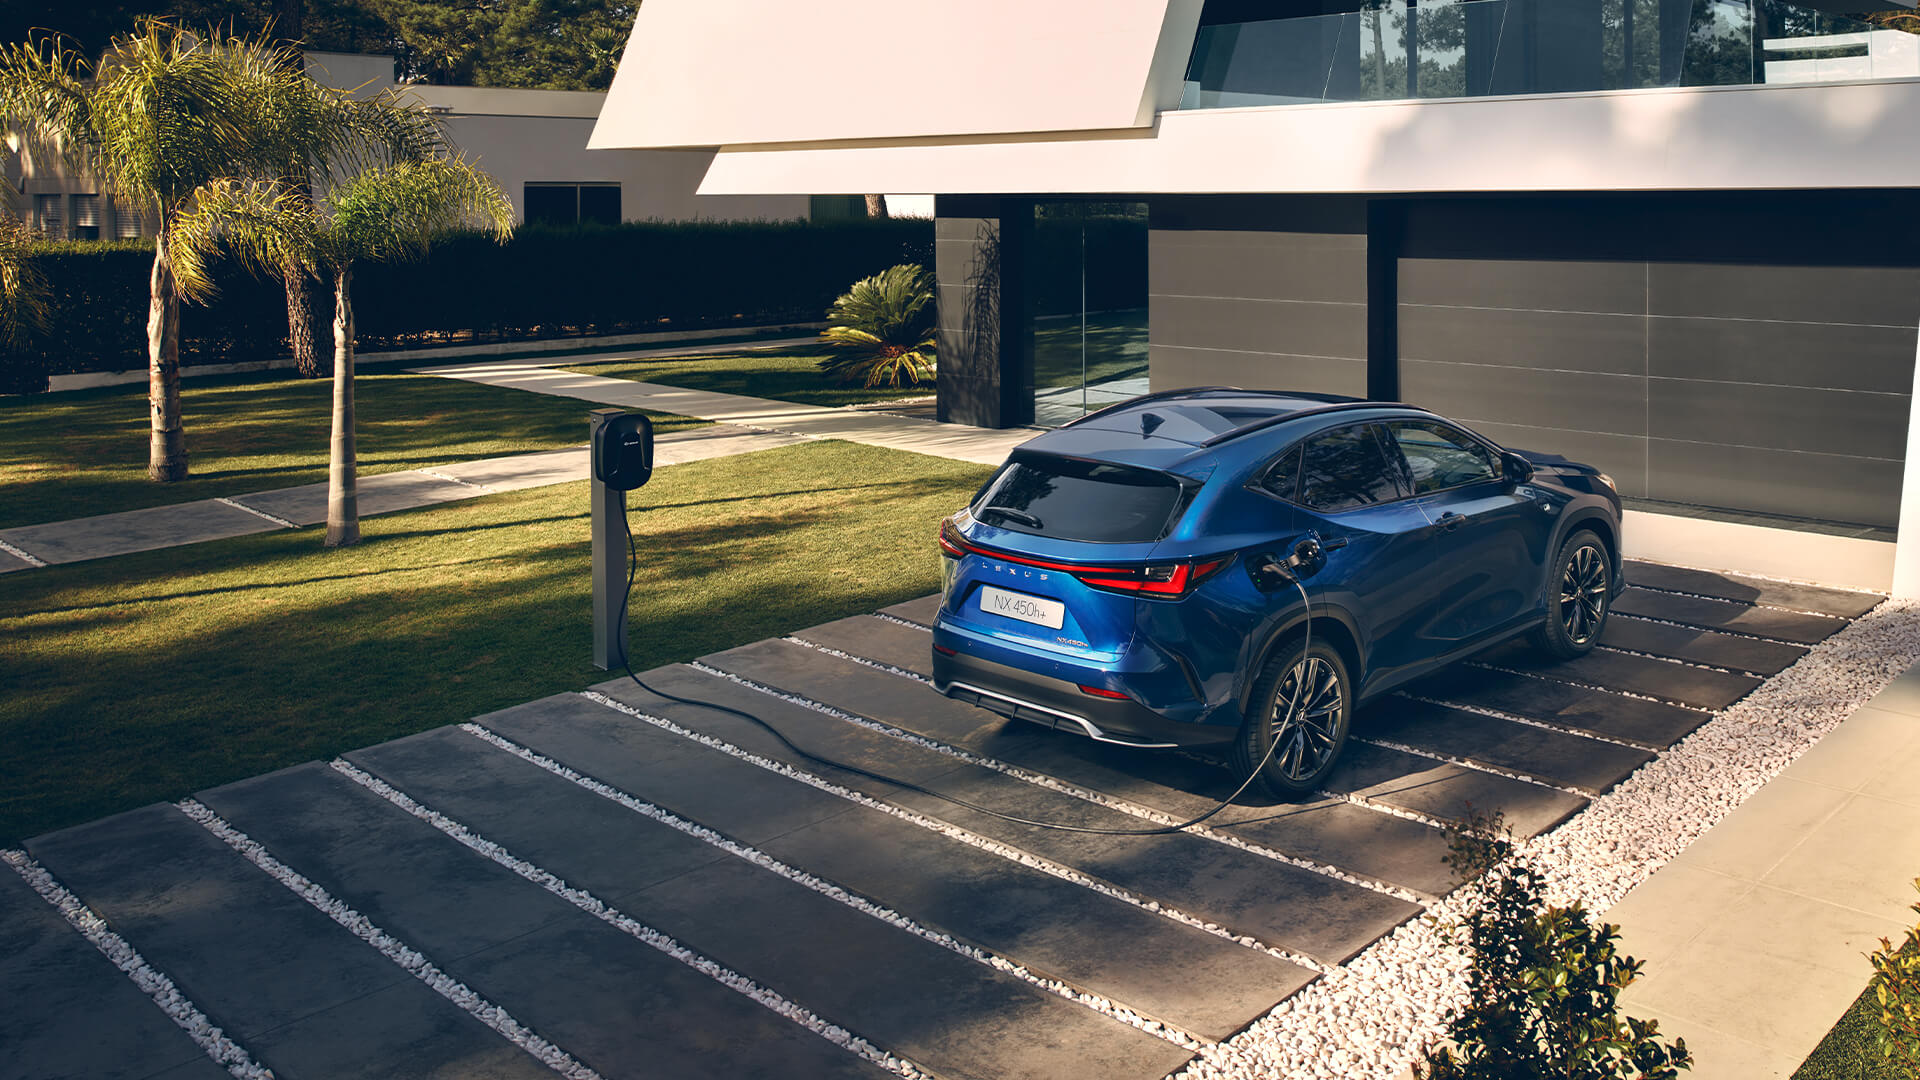 A Lexus NX 450h+ plugged into a charging station outside a home